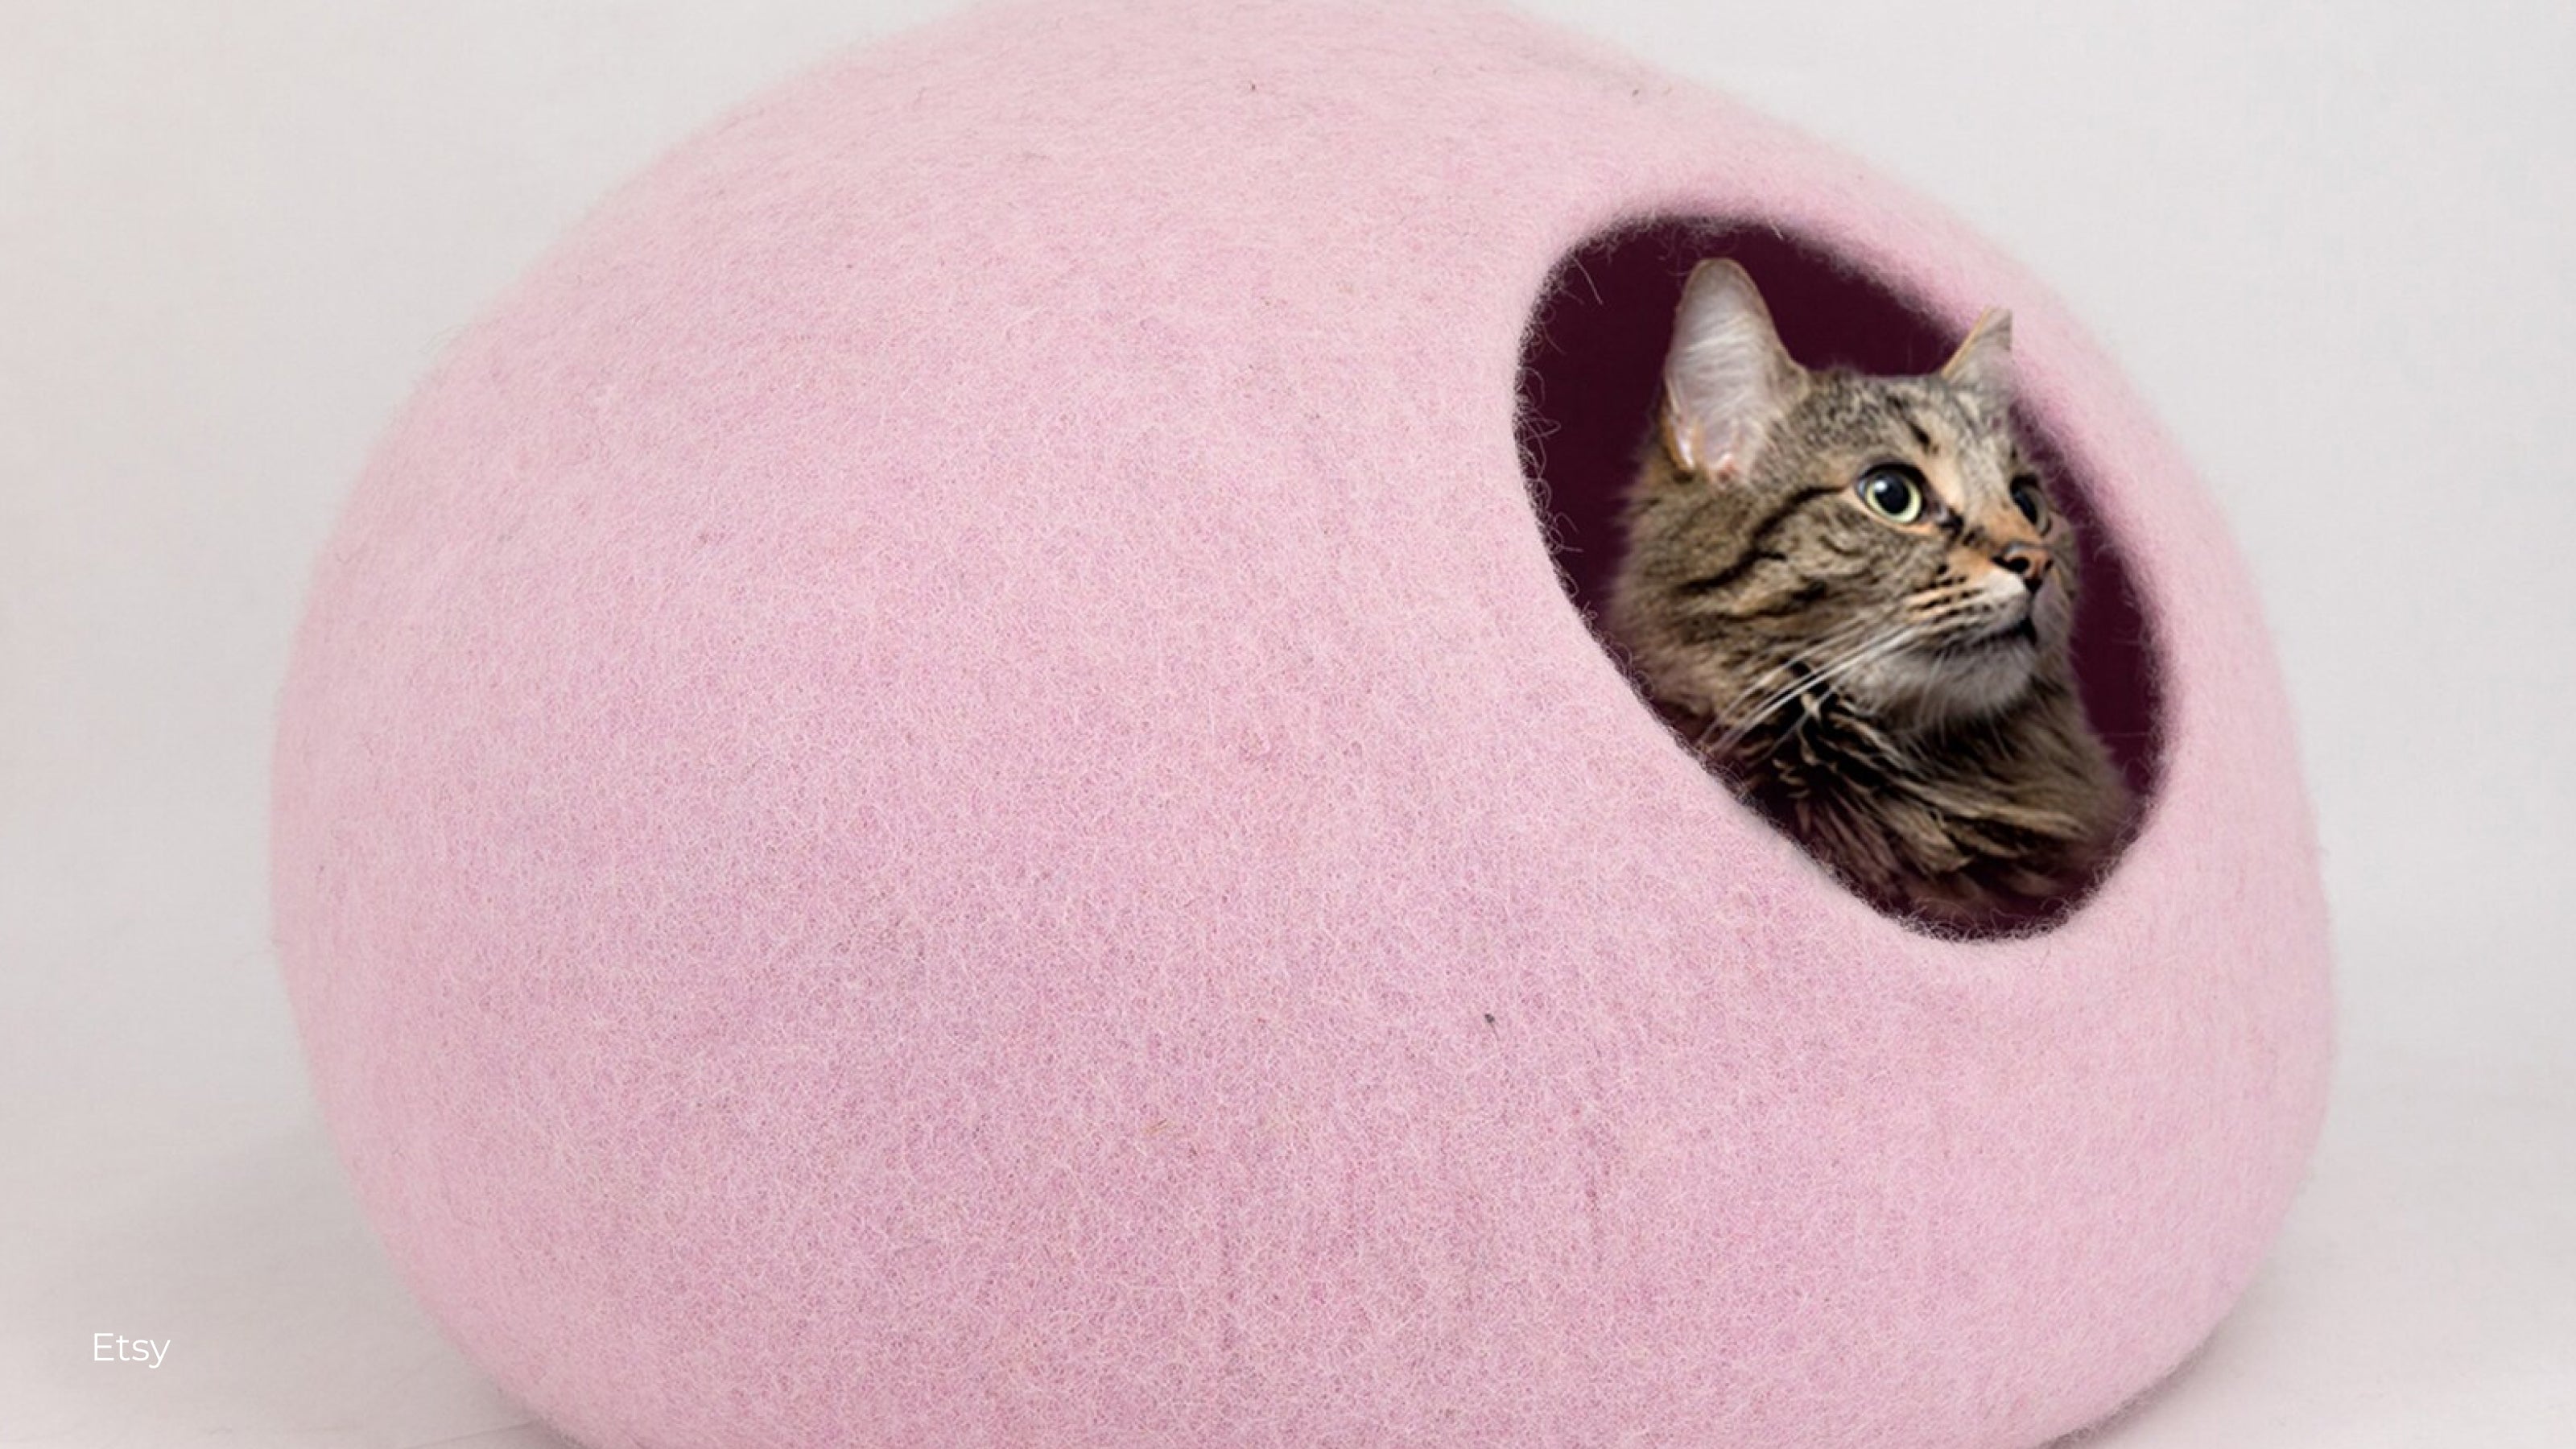 A black and gray cat peeks out from a hole in a pink felt cat den